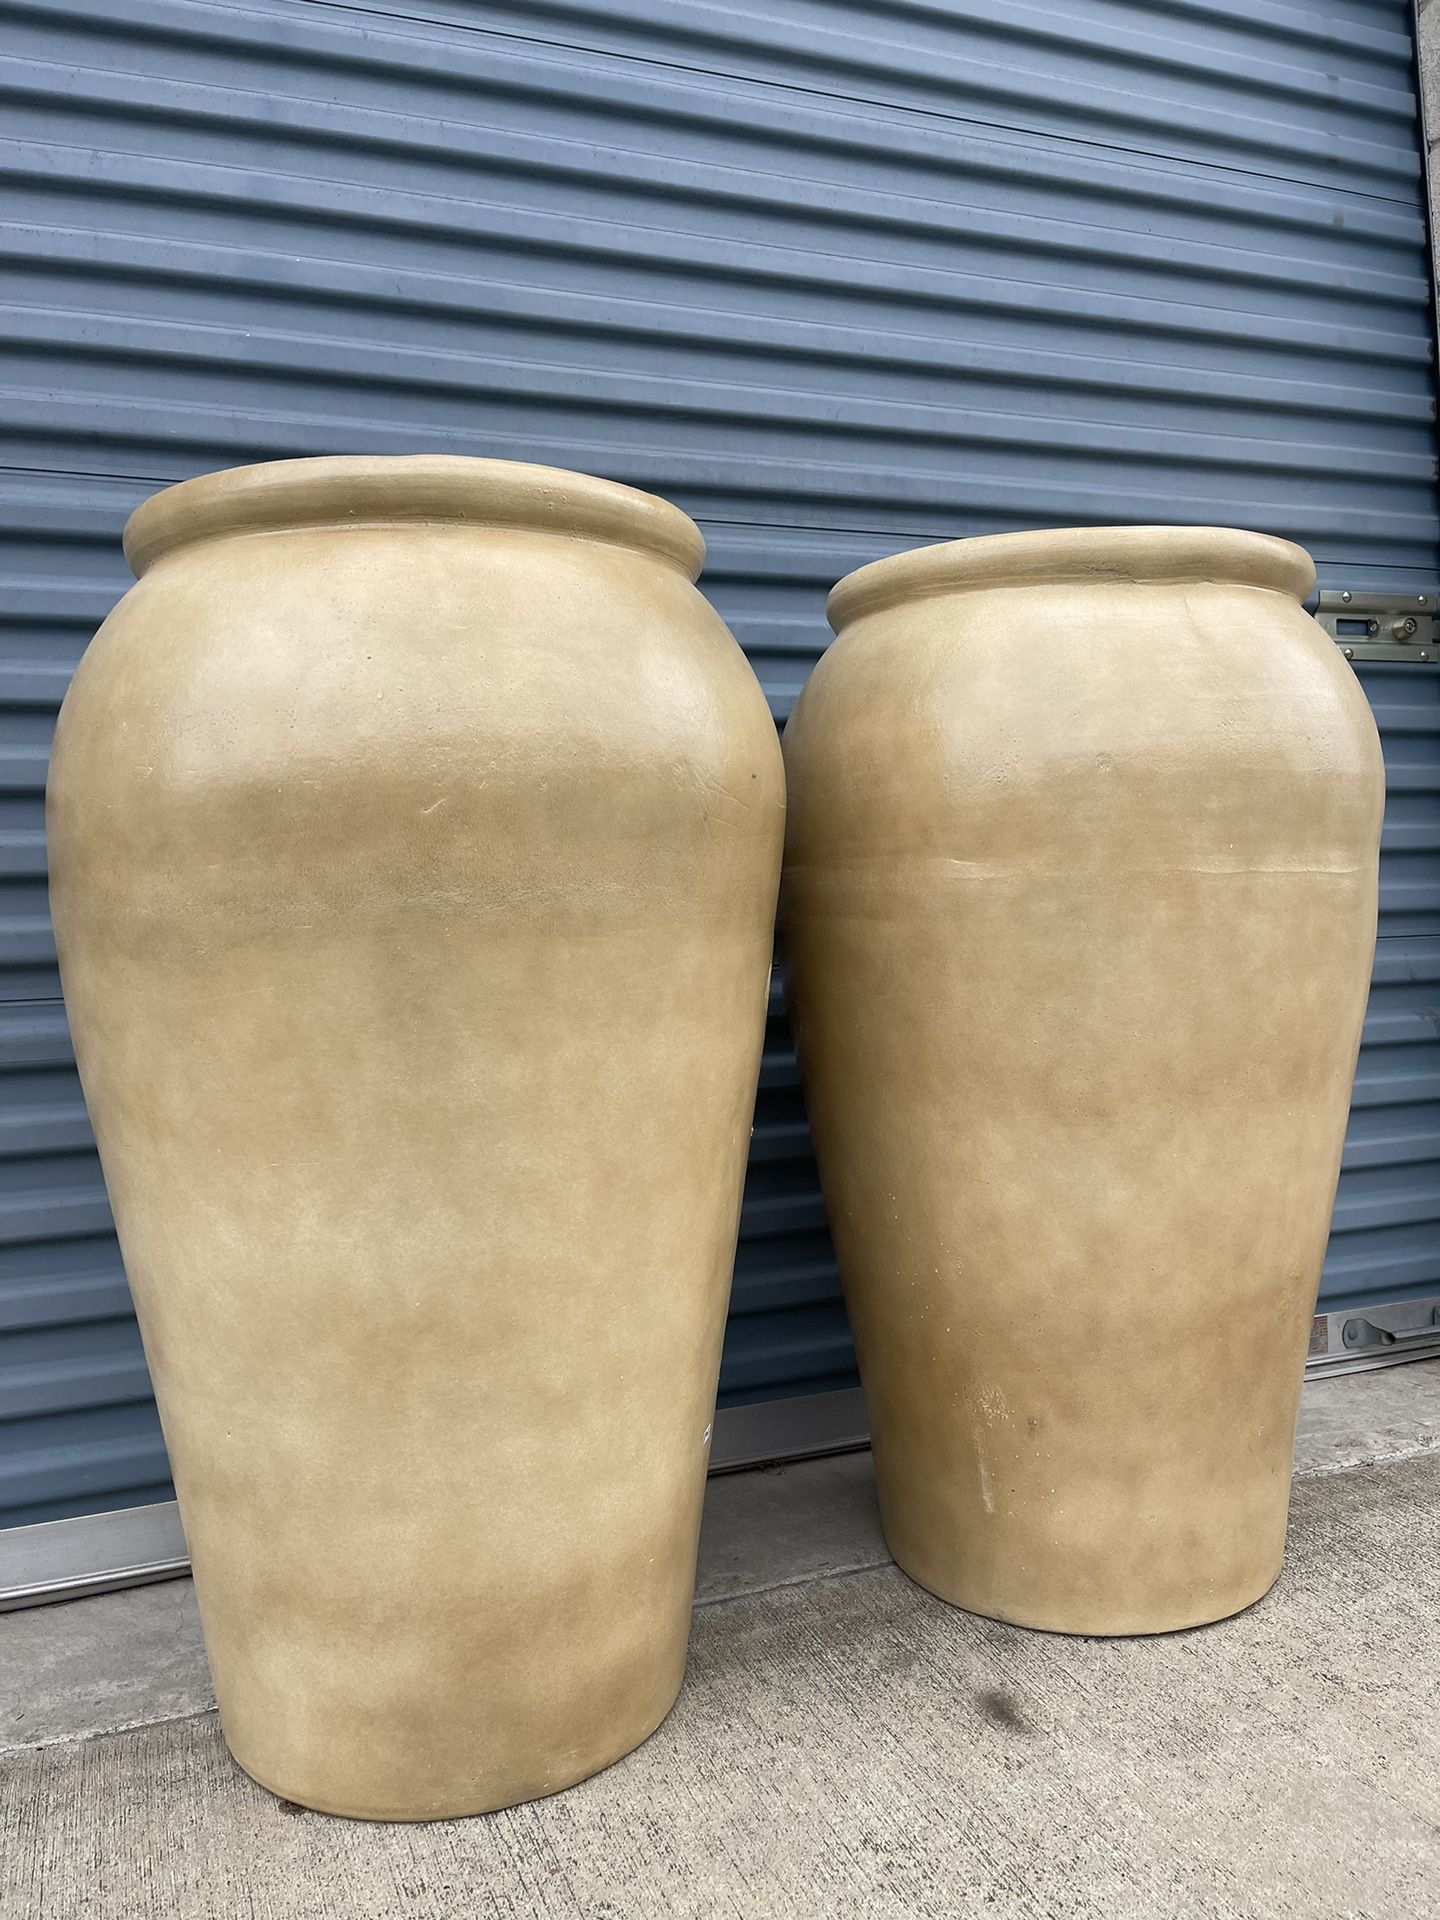 Tall Terracota Clay Vases 🏺🏺🏺🏺Inbox For Pricing 